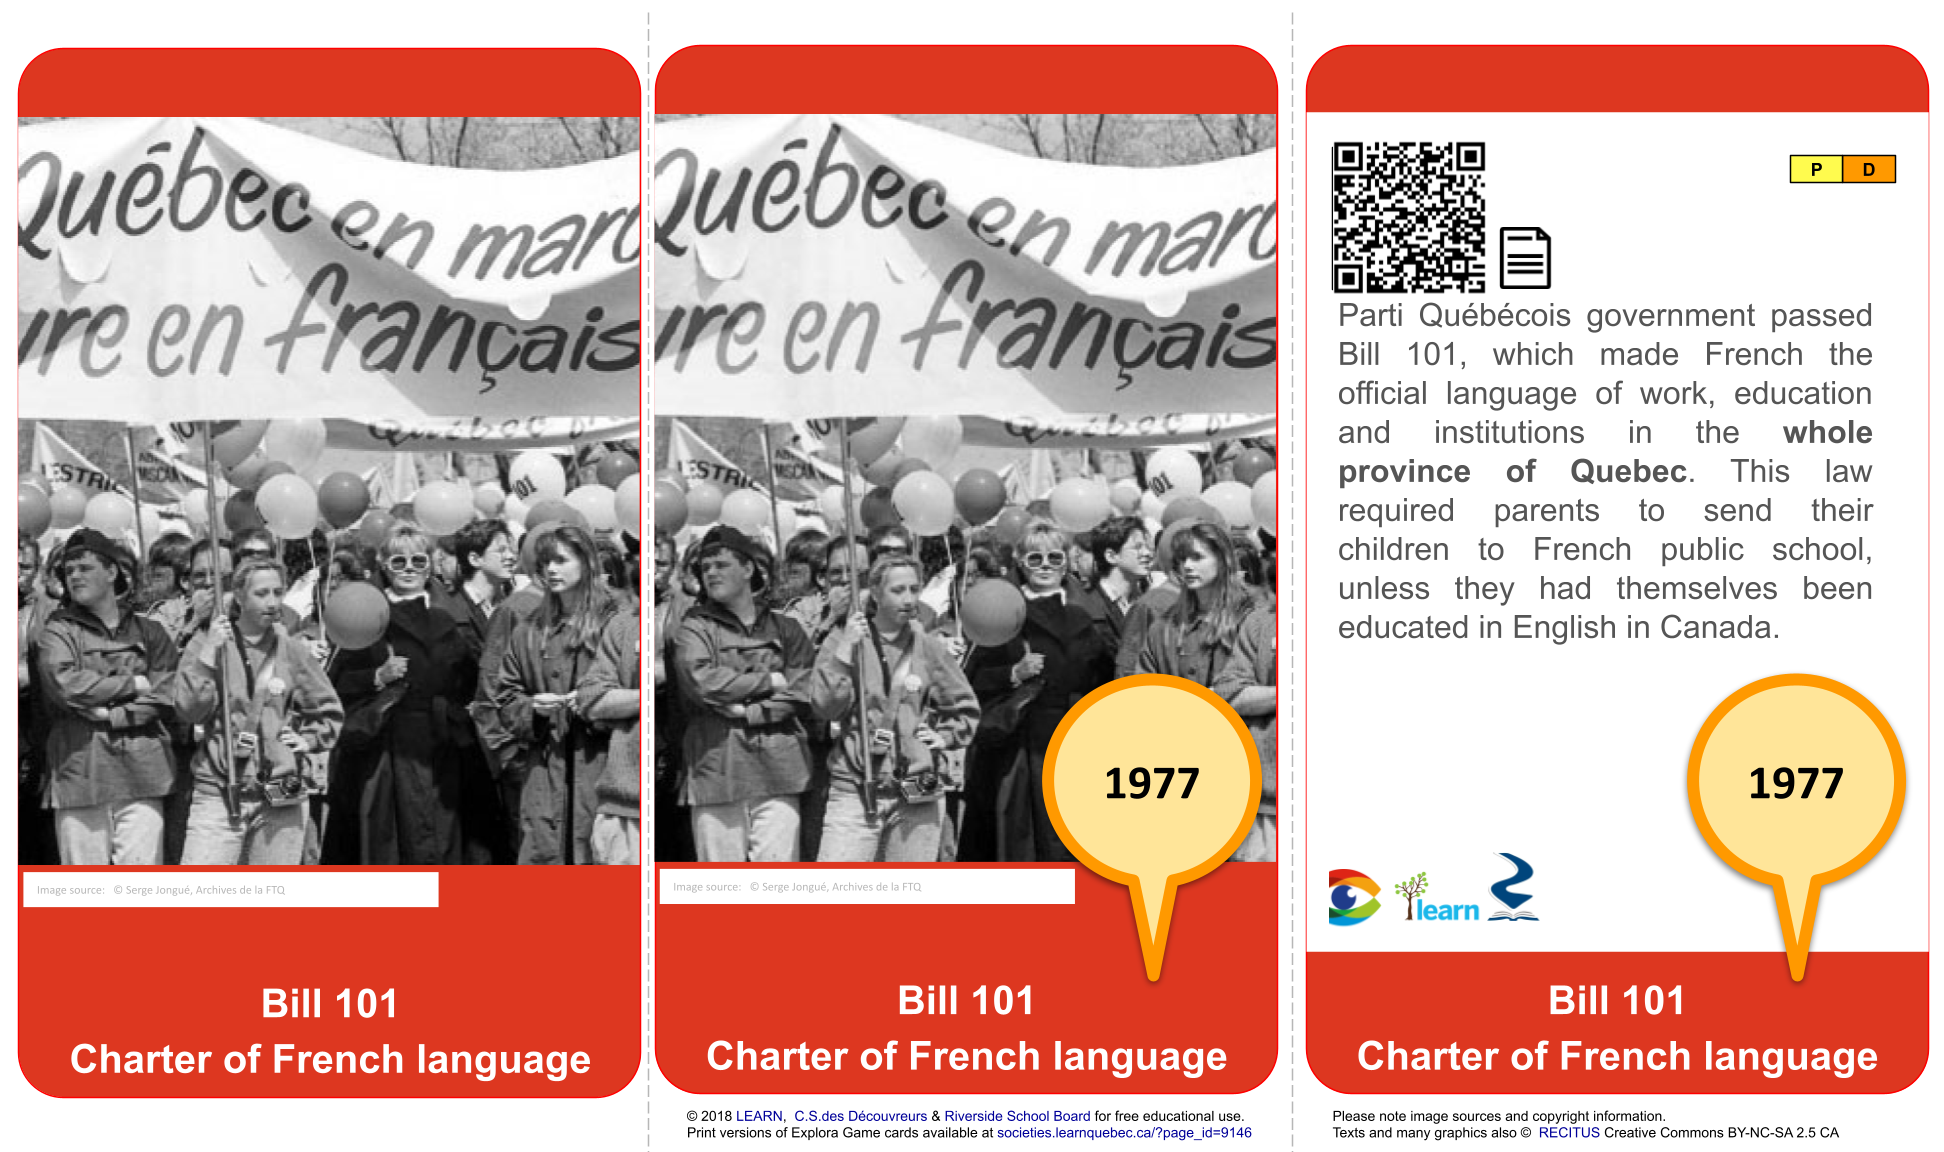 1977 Bill 101 Charter of the French language adopted